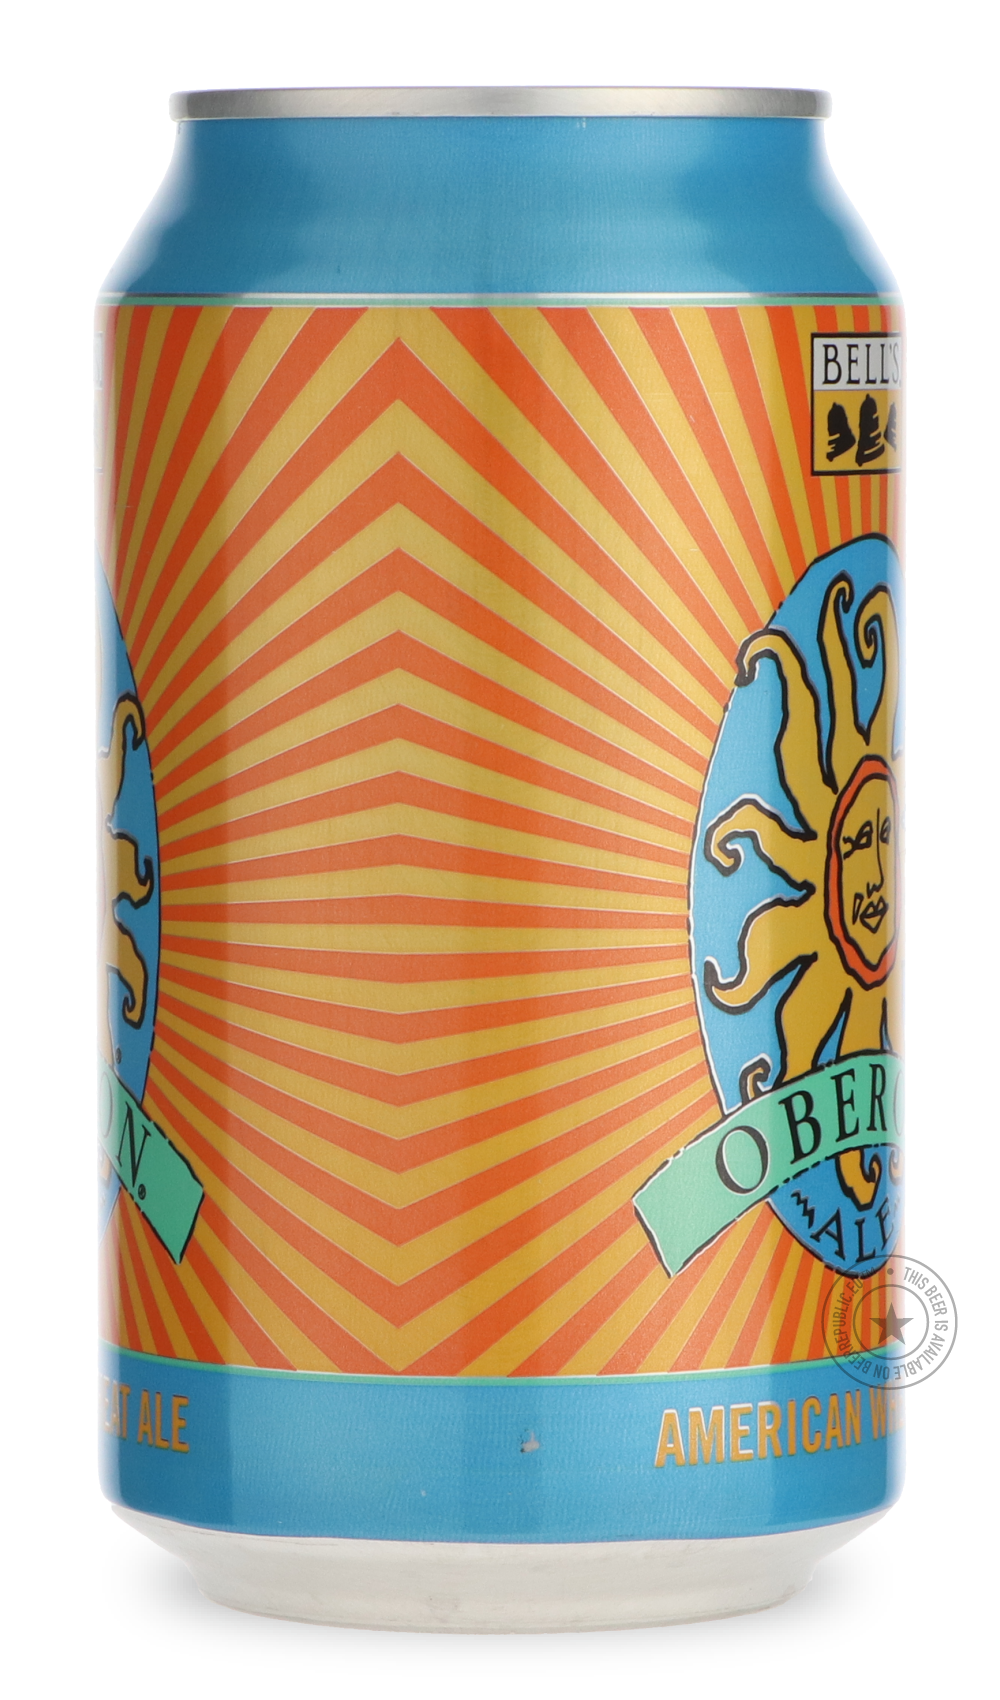 -Bell's- Oberon-Pale- Only @ Beer Republic - The best online beer store for American & Canadian craft beer - Buy beer online from the USA and Canada - Bier online kopen - Amerikaans bier kopen - Craft beer store - Craft beer kopen - Amerikanisch bier kaufen - Bier online kaufen - Acheter biere online - IPA - Stout - Porter - New England IPA - Hazy IPA - Imperial Stout - Barrel Aged - Barrel Aged Imperial Stout - Brown - Dark beer - Blond - Blonde - Pilsner - Lager - Wheat - Weizen - Amber - Barley Wine - Qu